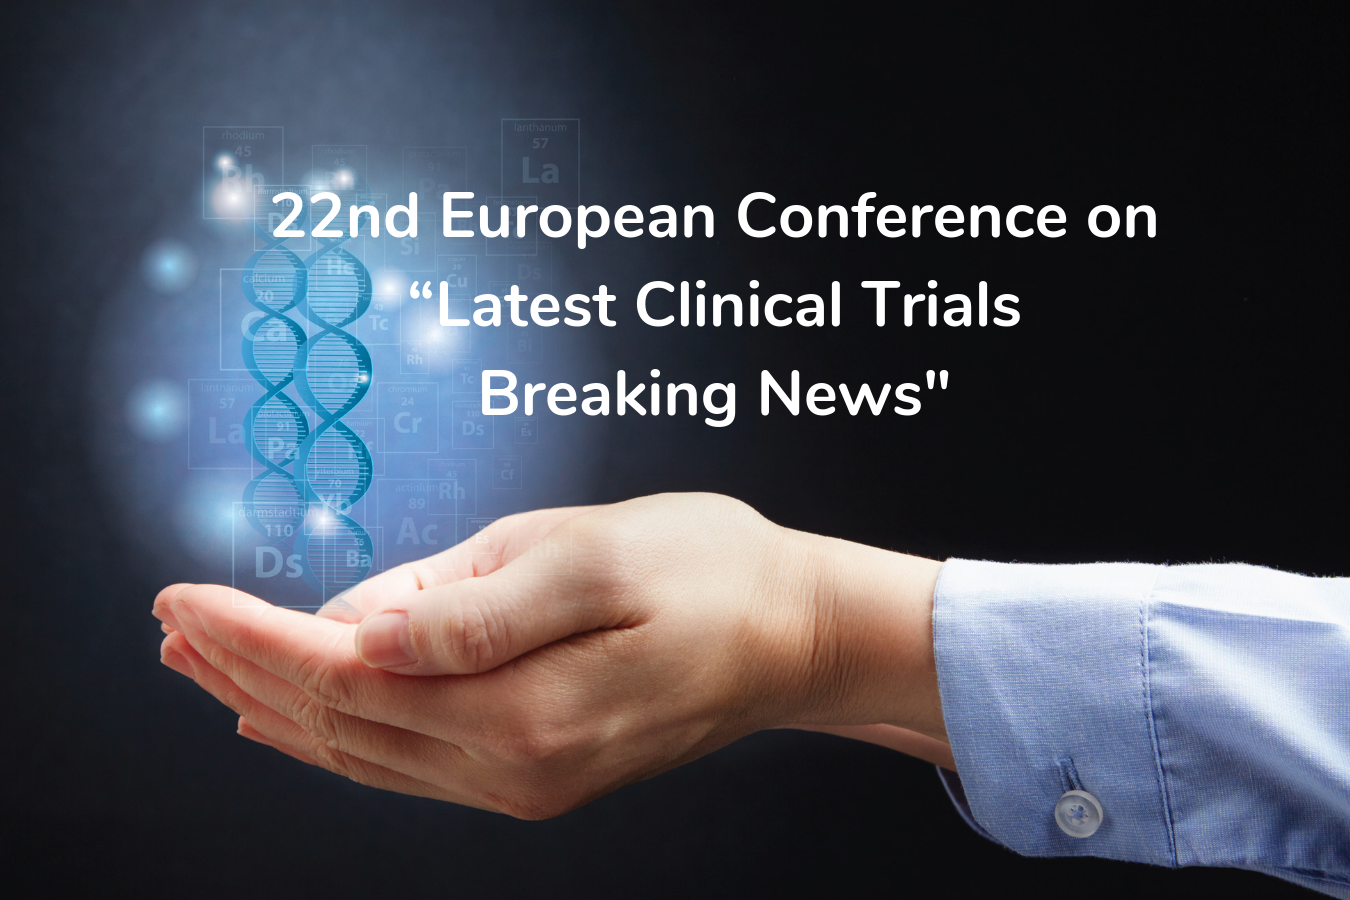 ACRP 22nd European Conference & Exhibition on “Latest Clinical Trials